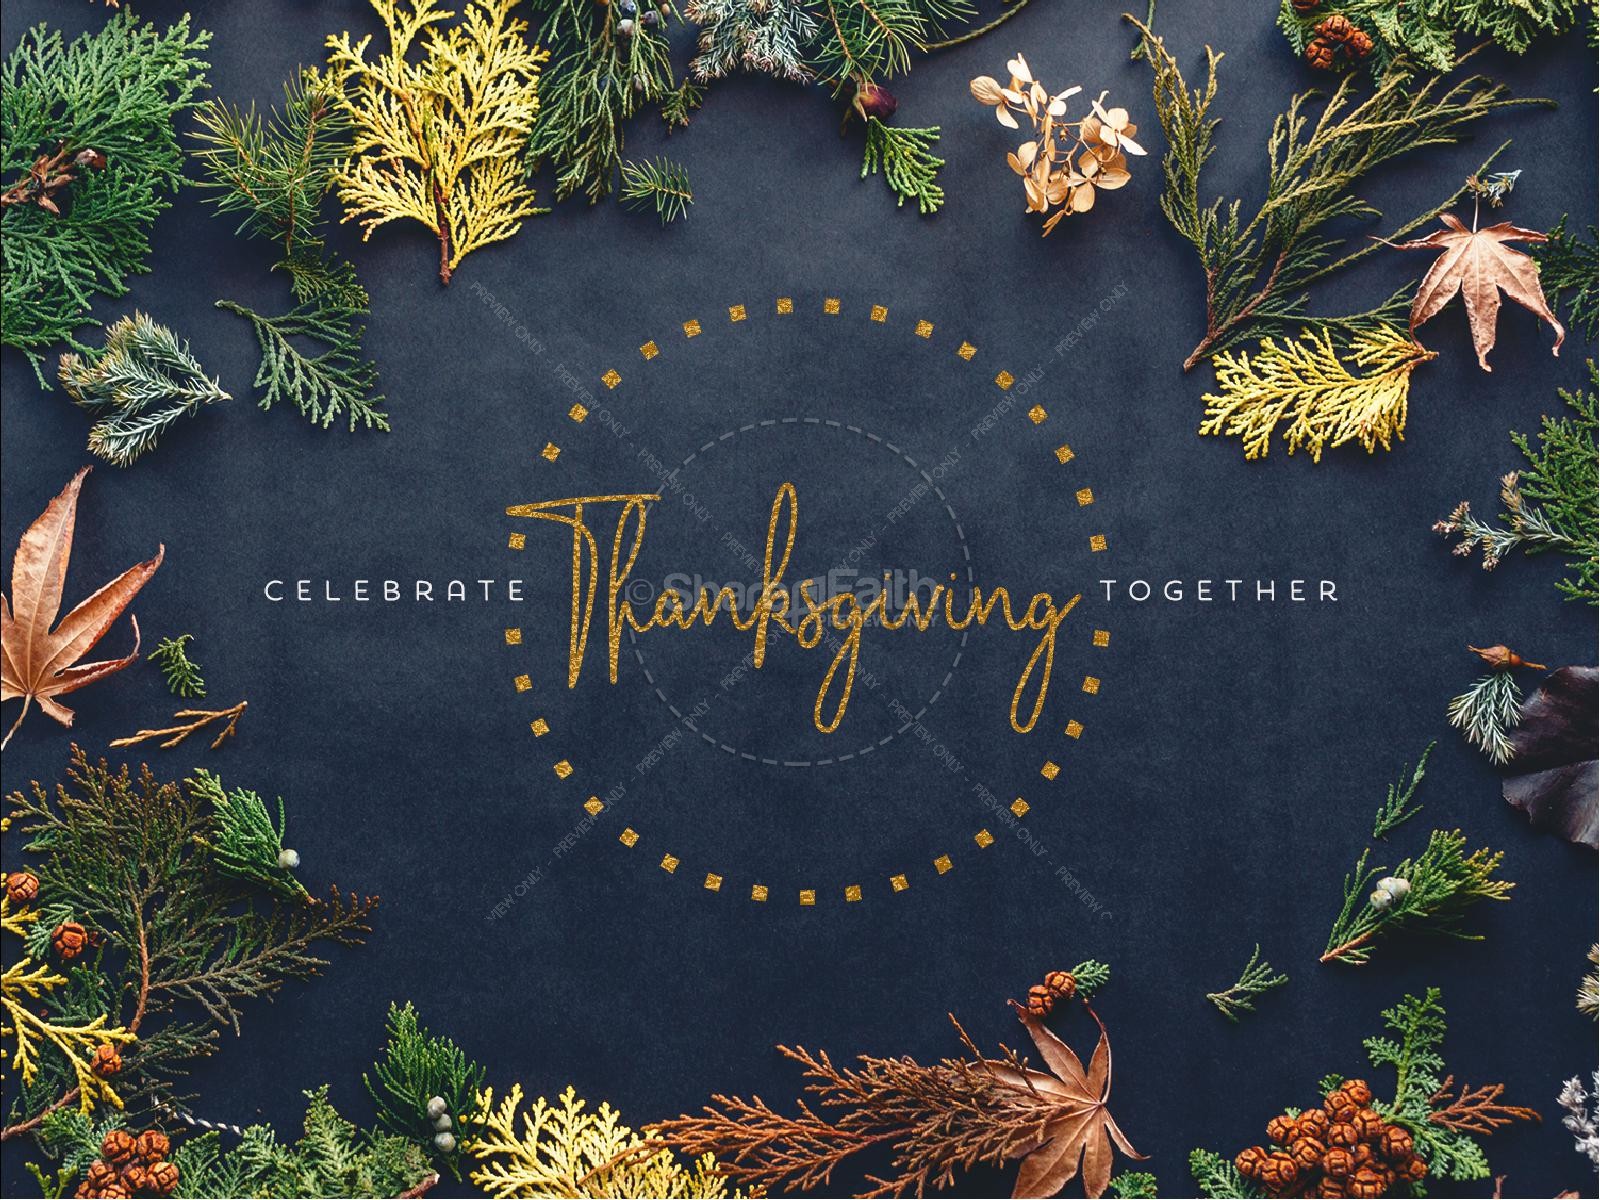 Celebrate Thanksgiving Together Church Powerpoint